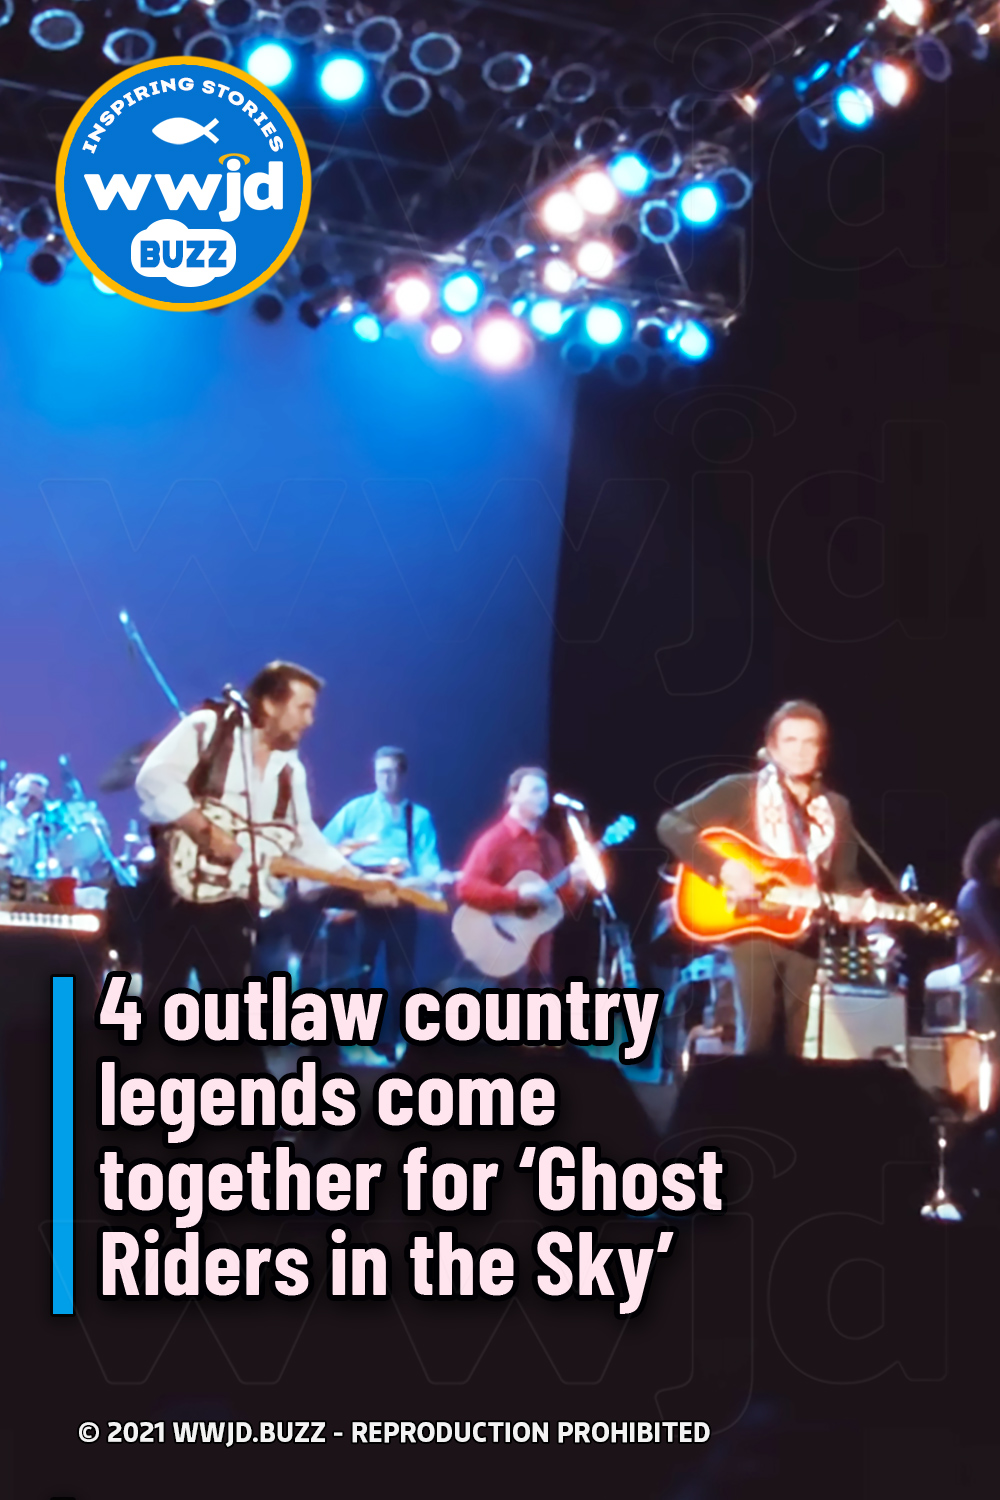 4 outlaw country legends come together for ‘Ghost Riders in the Sky’